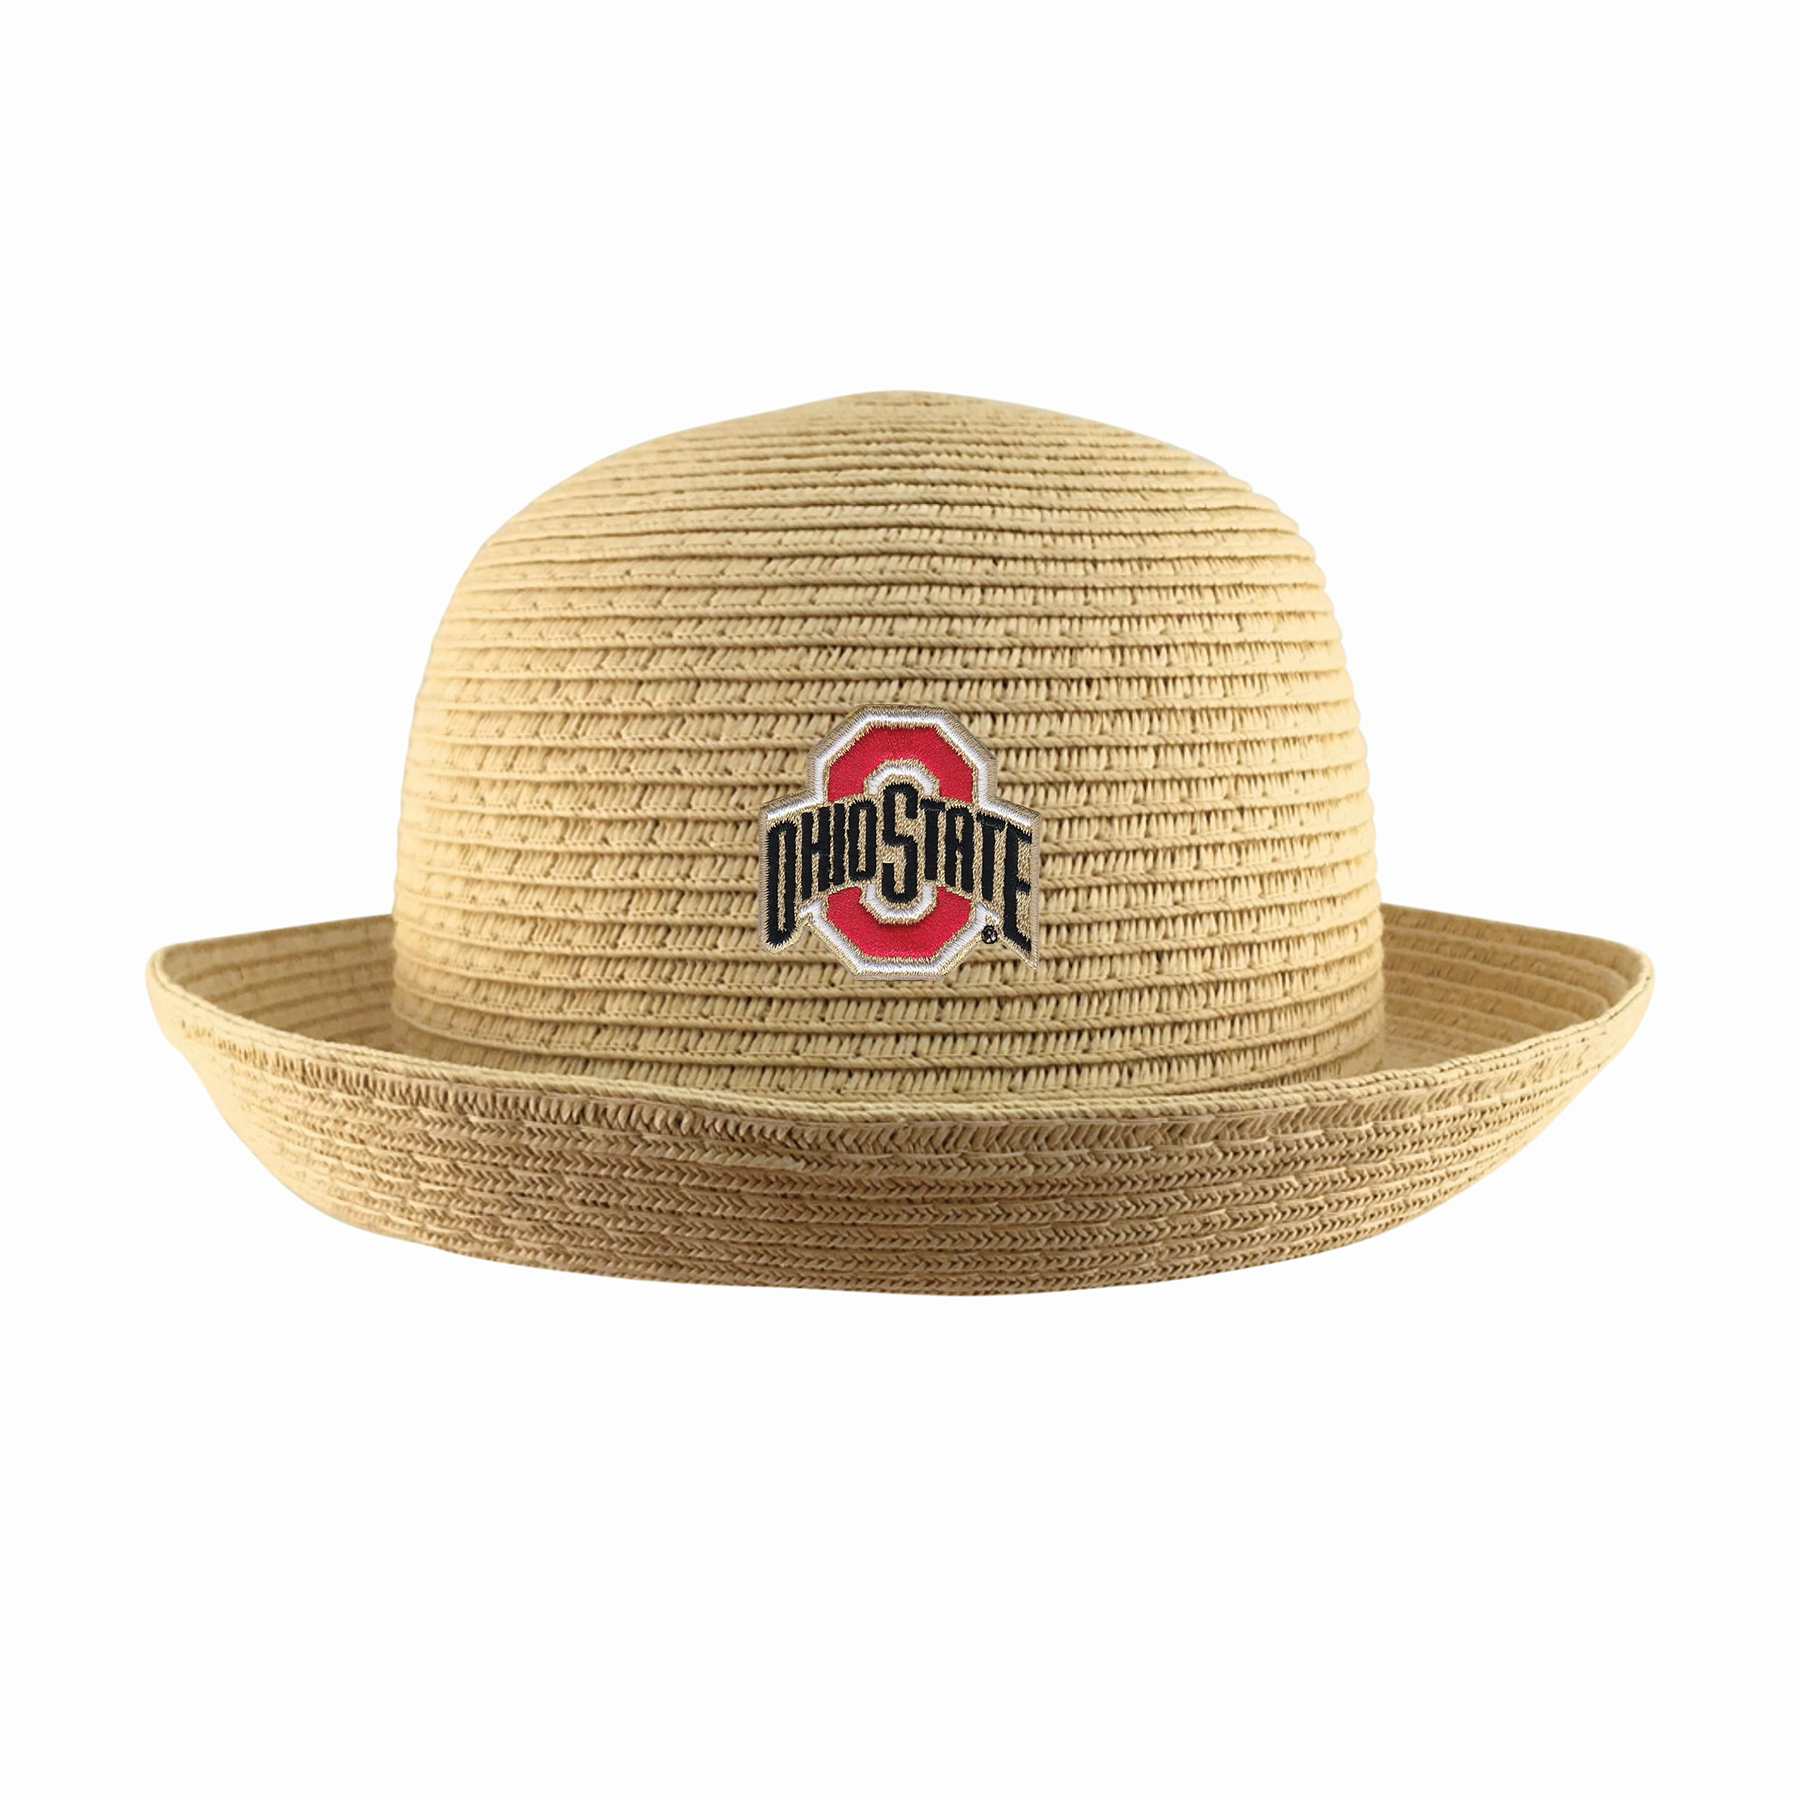 OHIO STATE GEORGE- YOUTH STRAW BOWLER SUN HAT